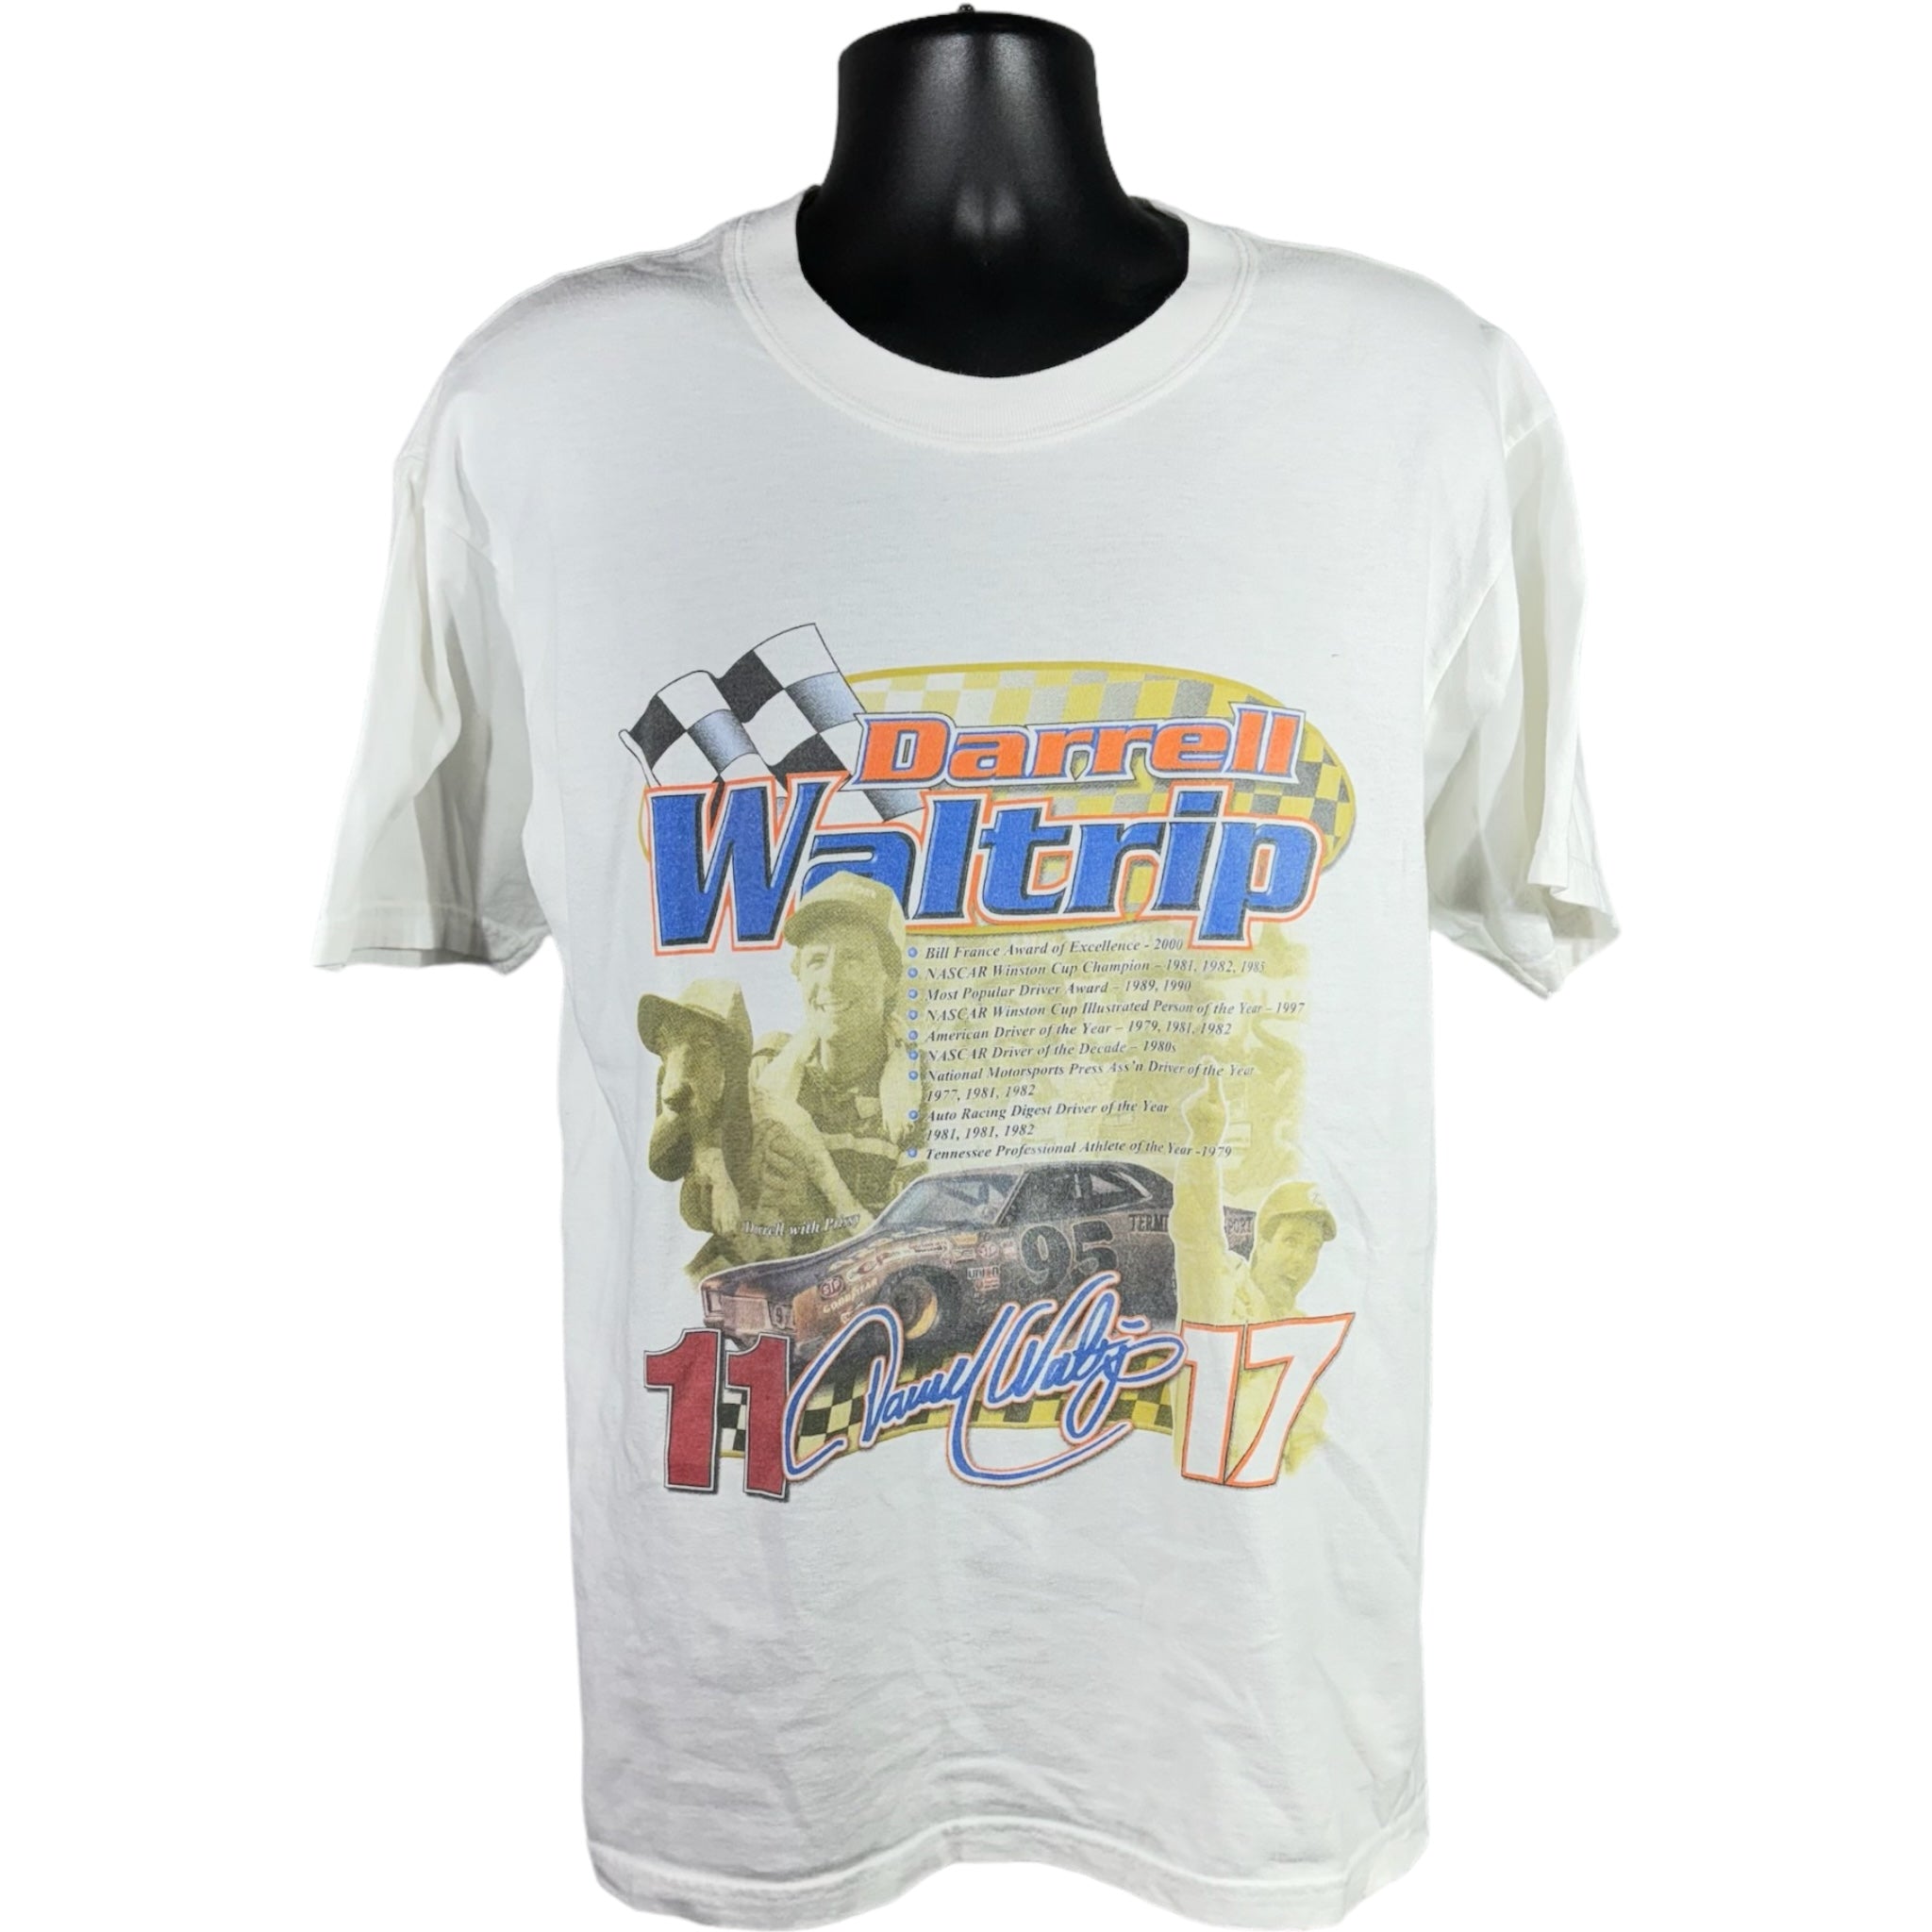 Vintage Darrell Waltrip "The Story Of A Champion" NASCAR Tee